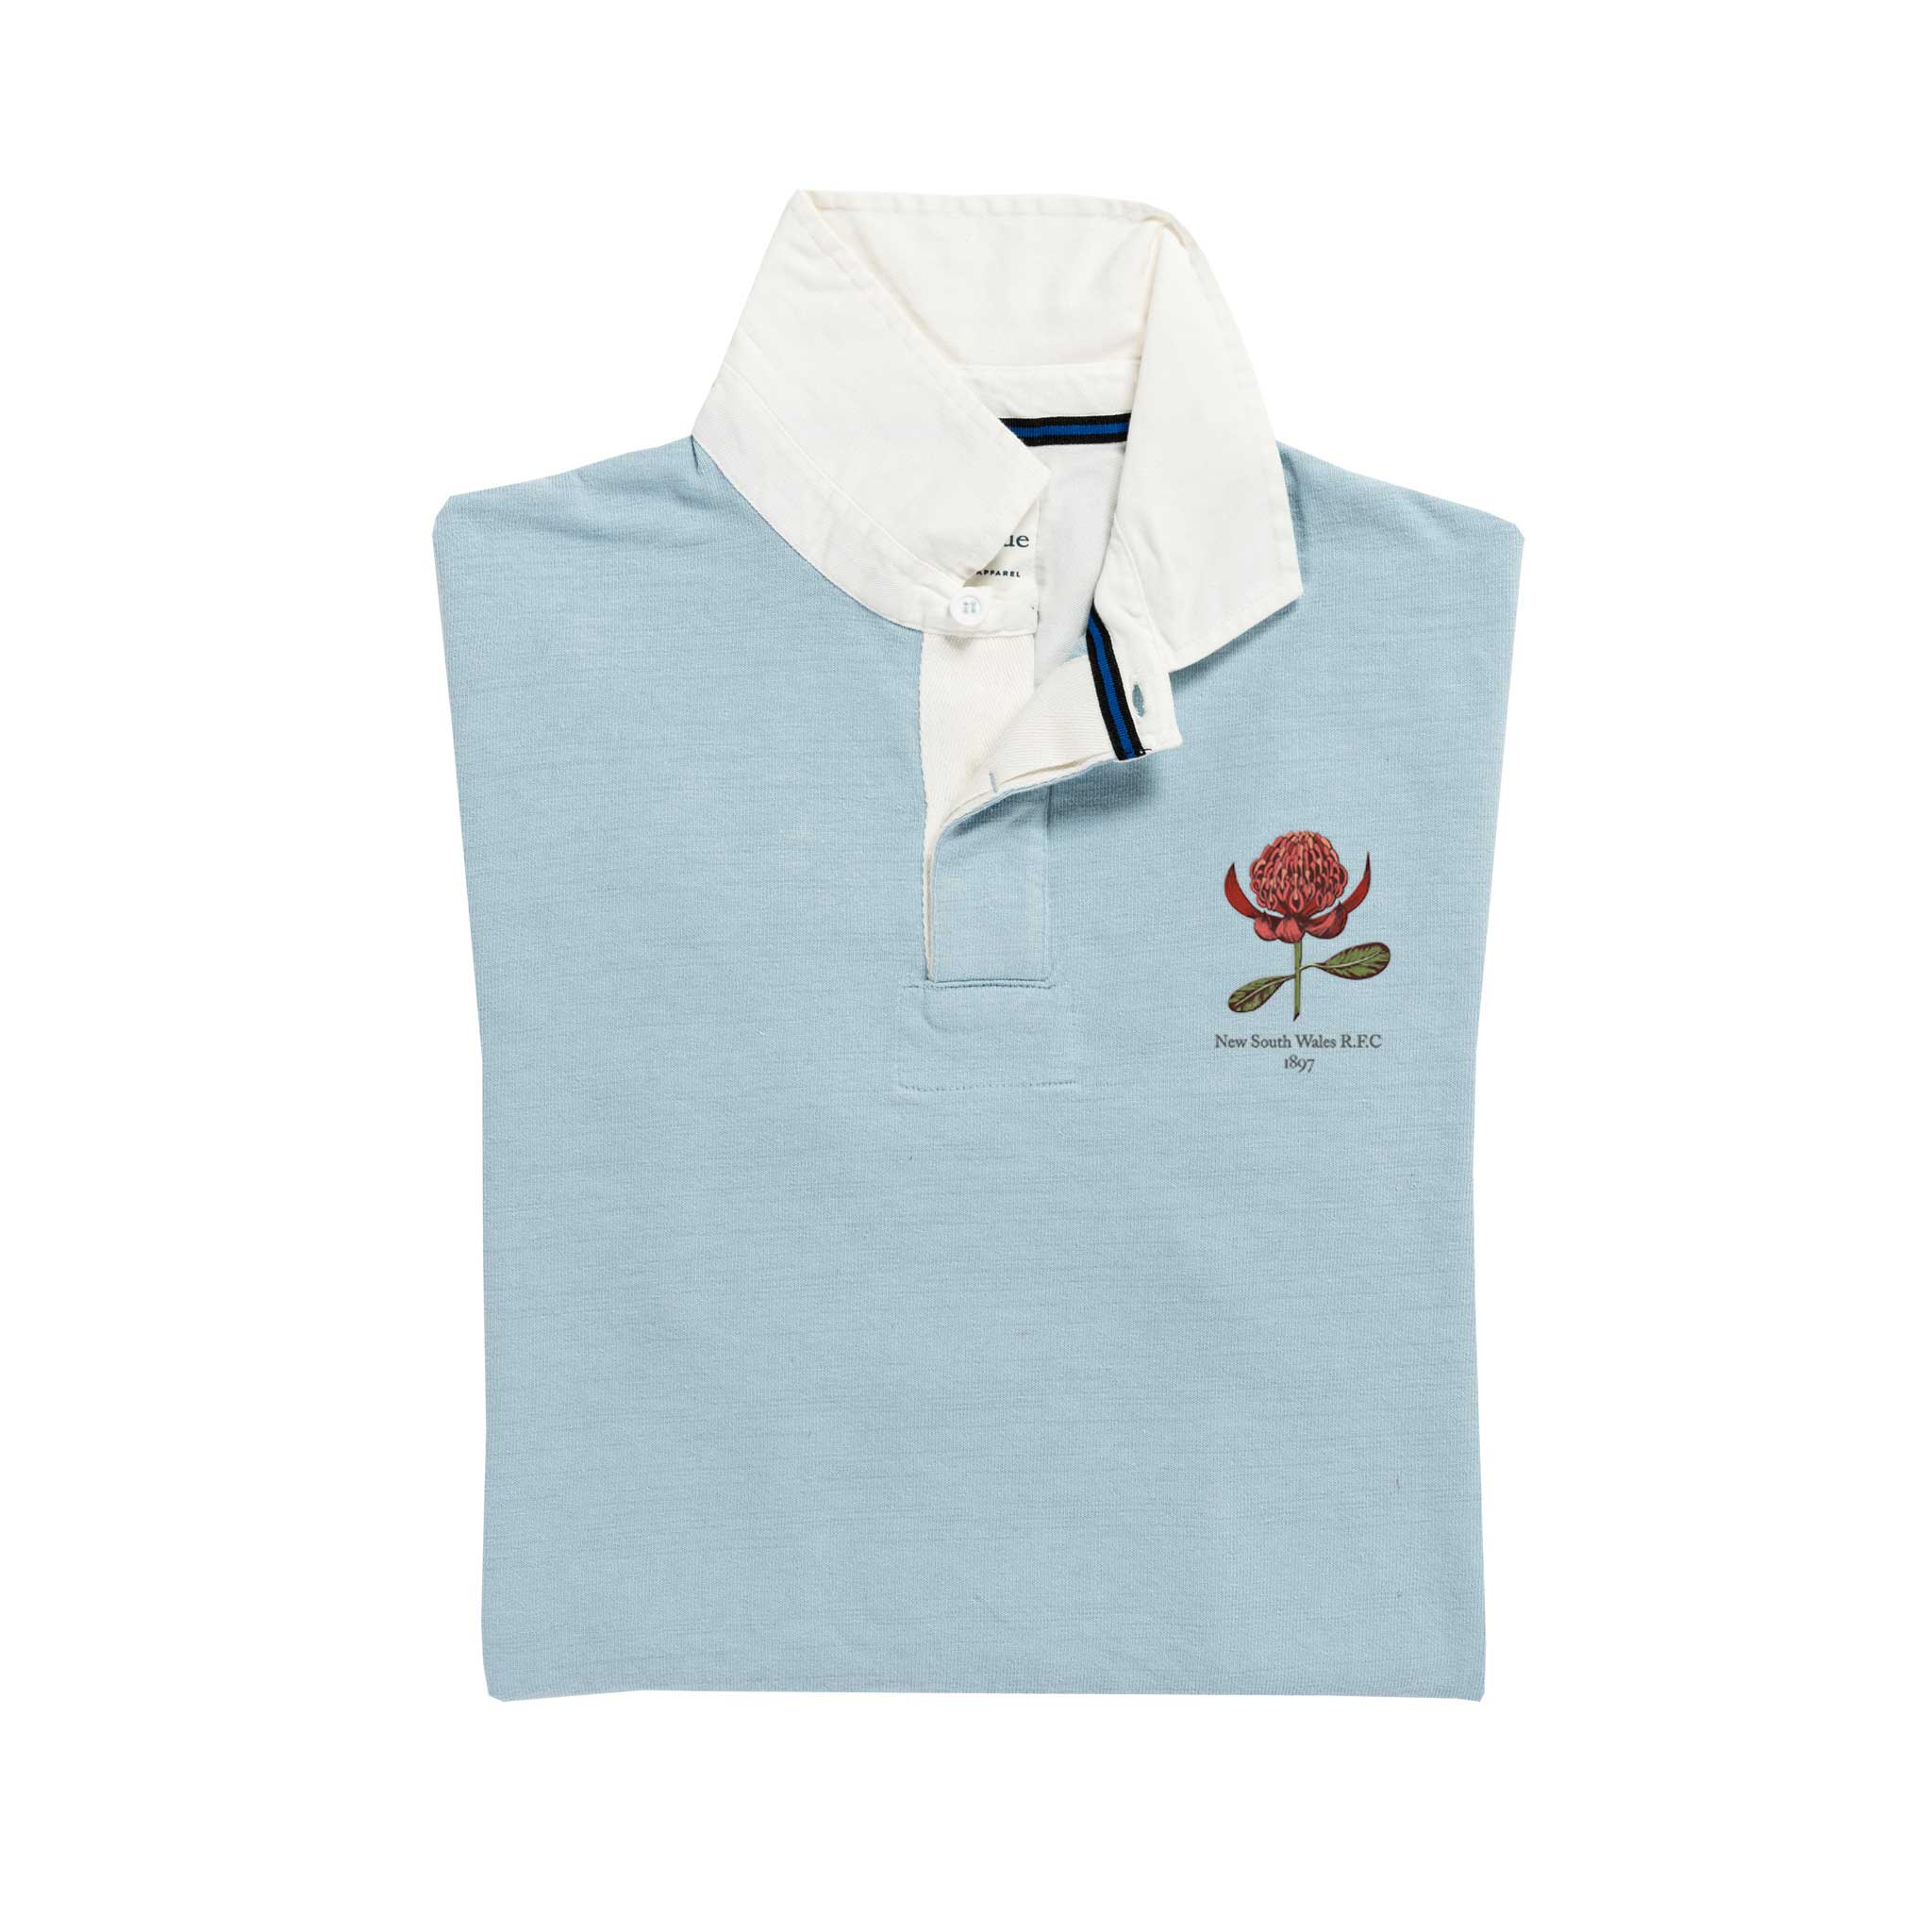 NSW 1897 Rugby Shirt_Folded